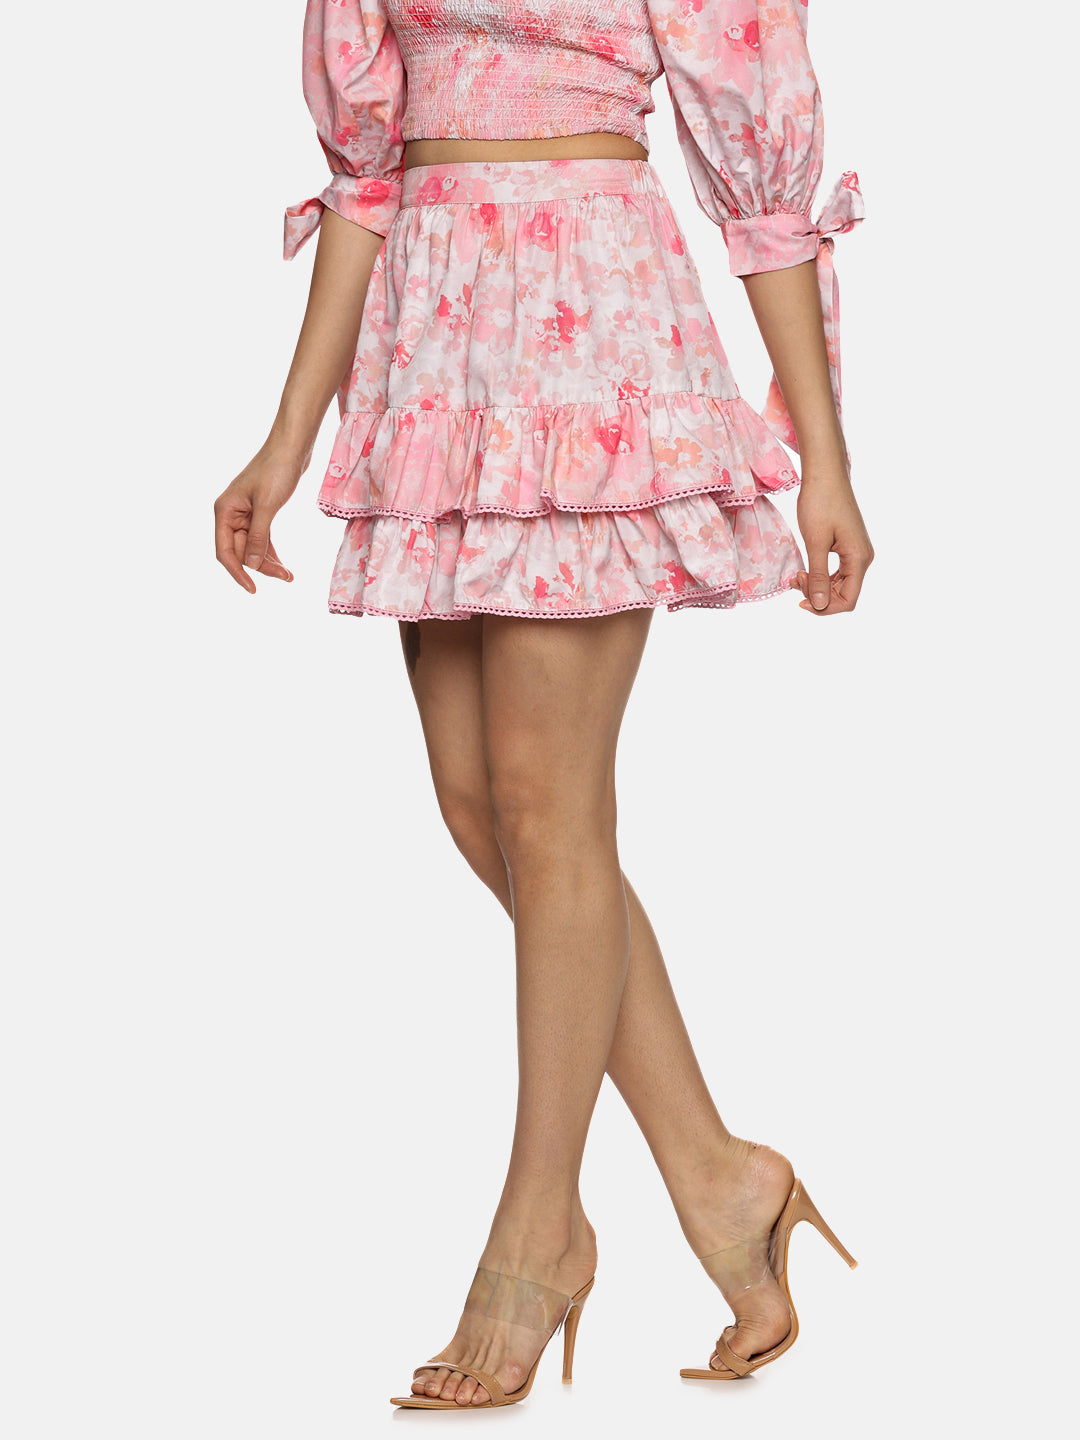 IS.U Floral Pink Two Tier Mini Skirt